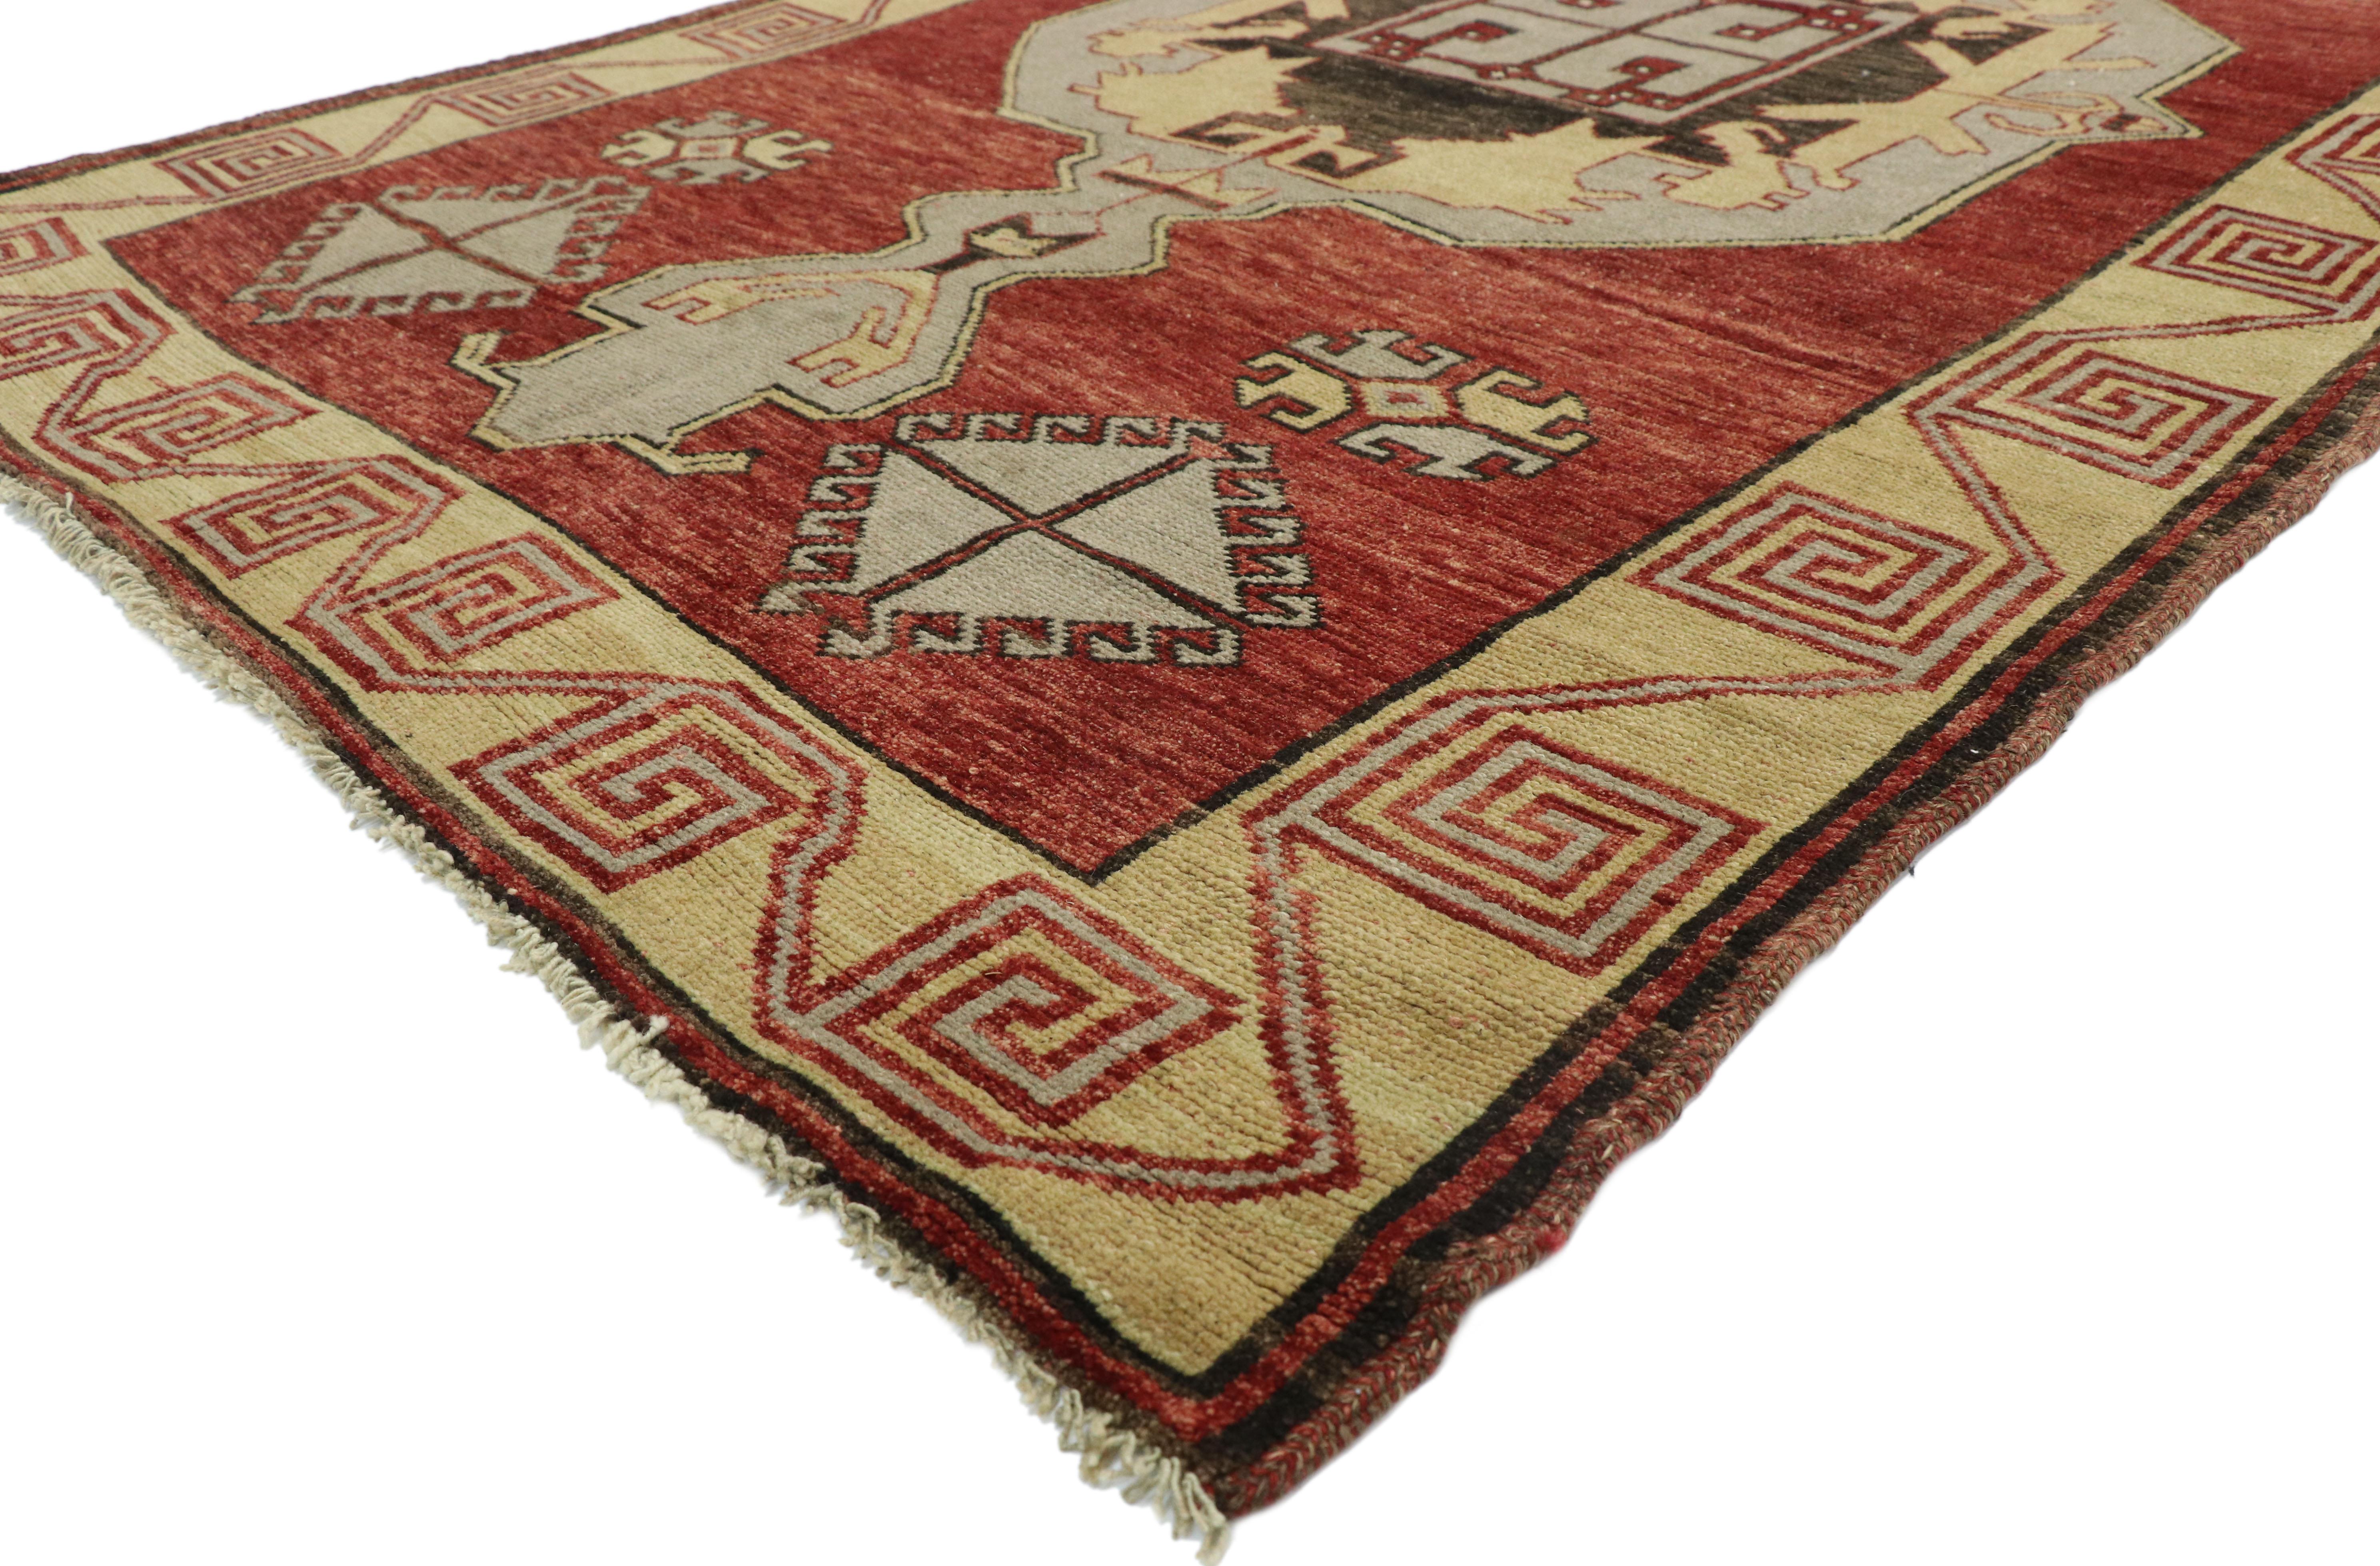 51640 Vintage Turkish Oushak runner with Mid-Century Modern style, Wide Hallway runner 04'10 x 14'09. Full of character and stately presence, this vintage Turkish Oushak runner (gallery rug) with Mid-Century Modern style showcases an extravagant